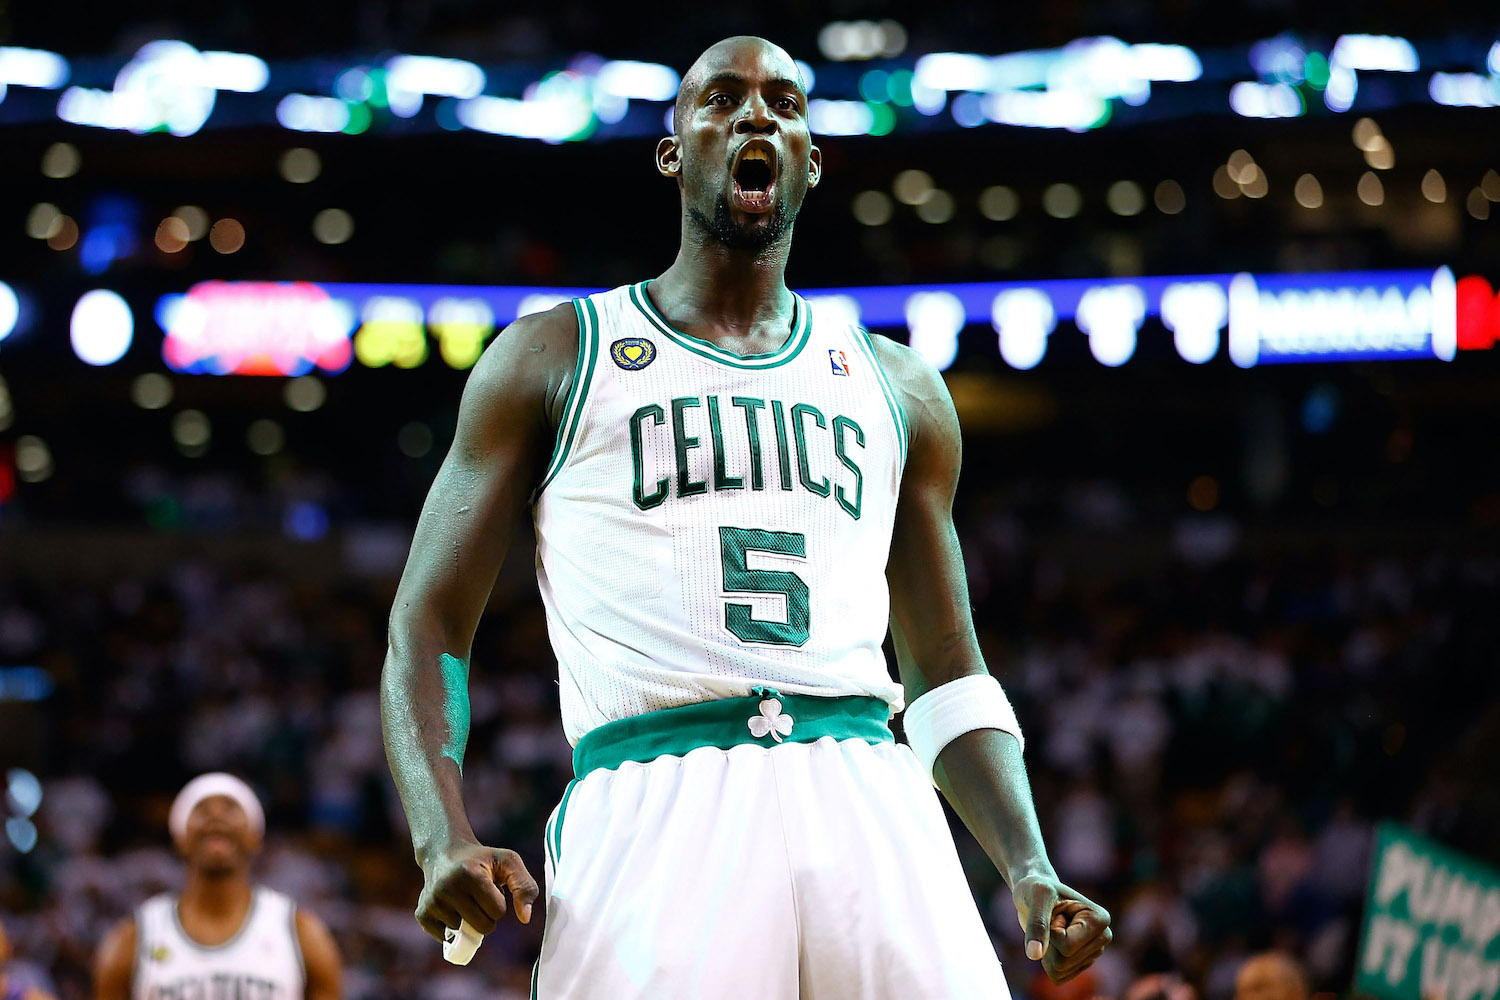 Kevin Garnett reacts during a Boston Celtic playoff game.